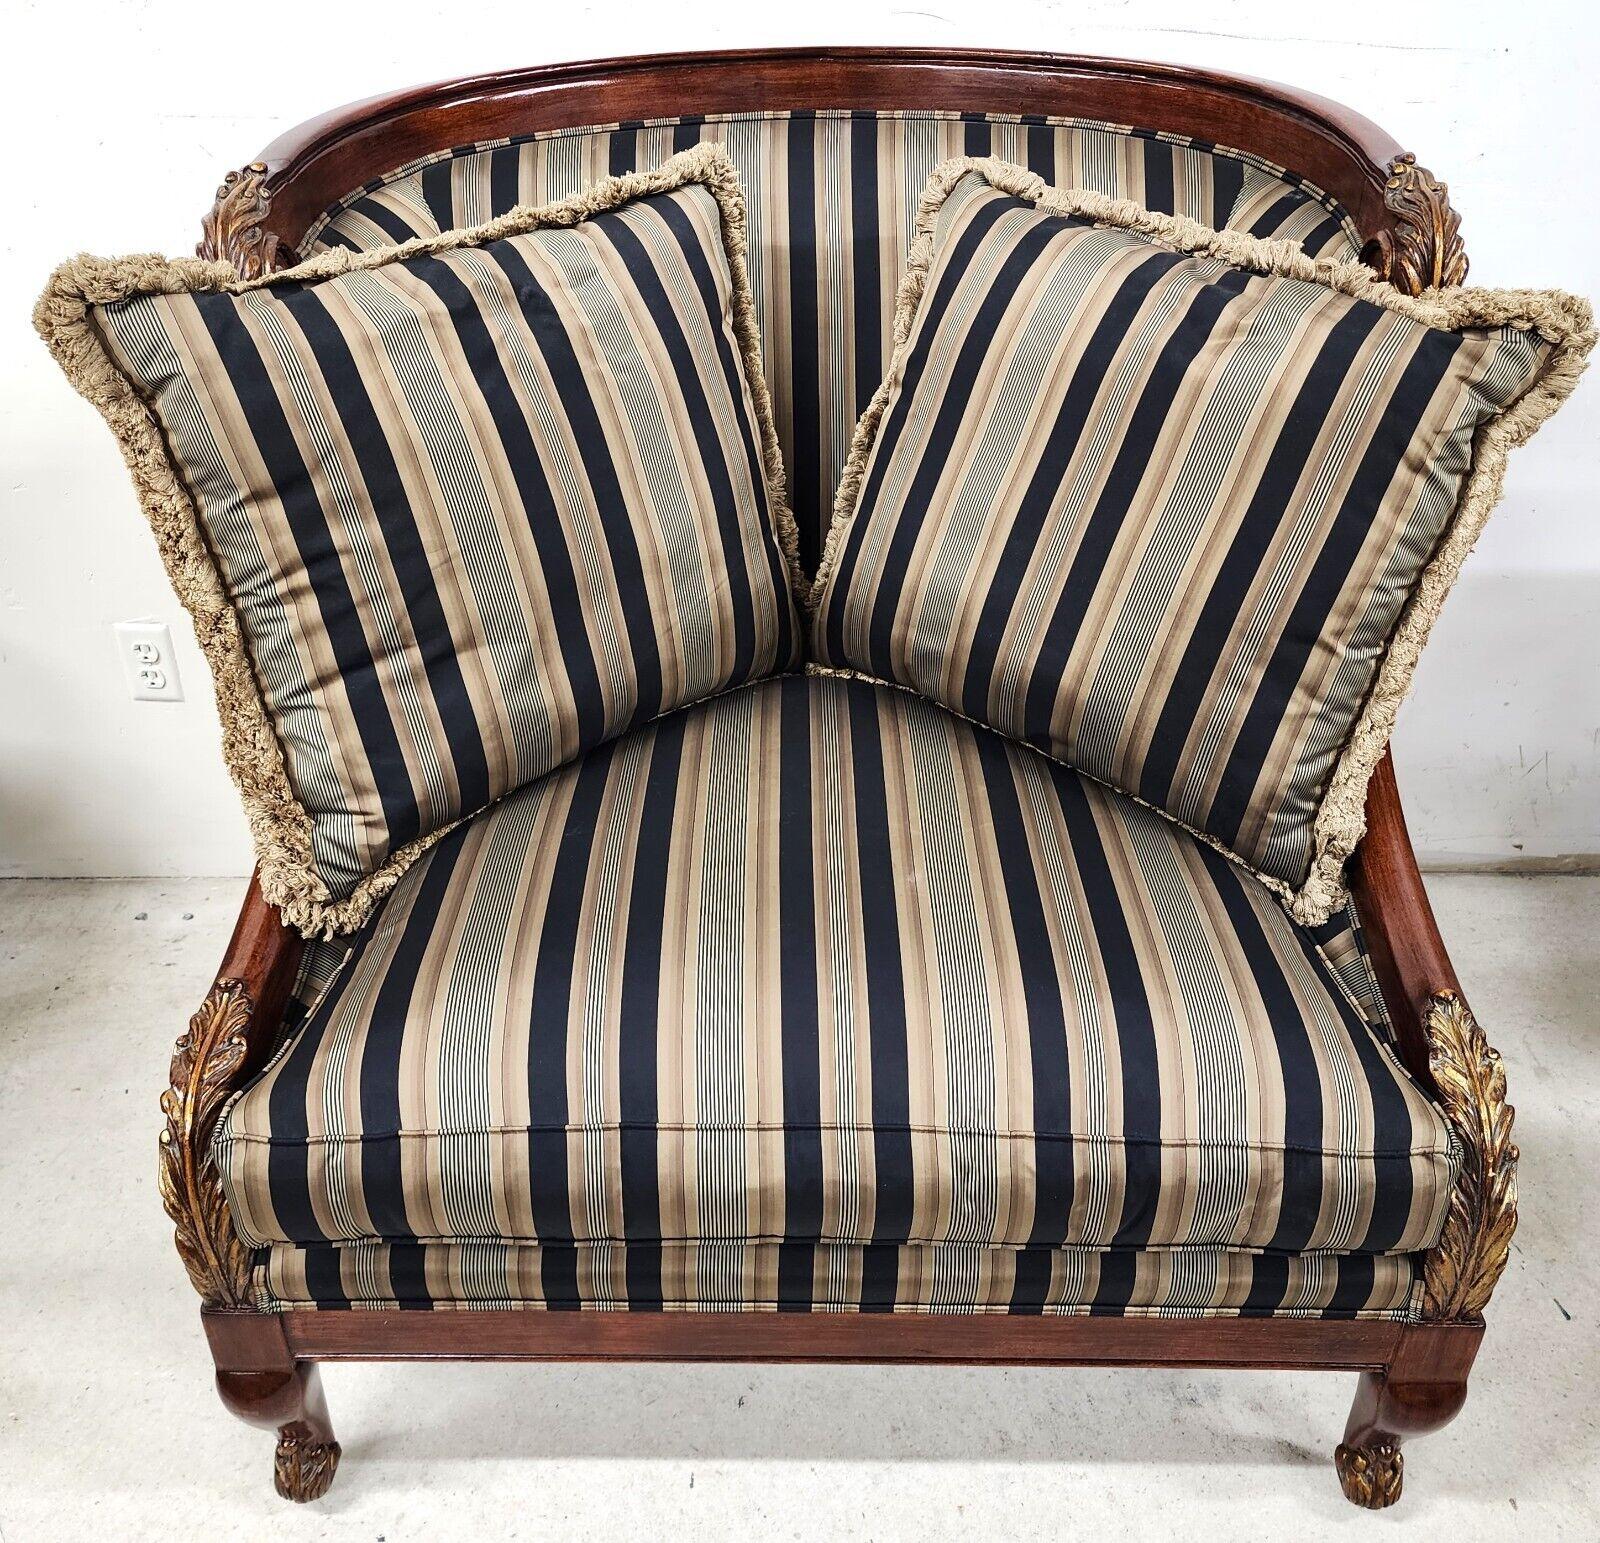 For FULL item description click on CONTINUE READING at the bottom of this page.

Offering One Of Our Recent Palm Beach Estate Fine Furniture Acquisitions Of An 
Oversized Lounge Settee Chair by Marge Carson
(We had 2 of these chairs available